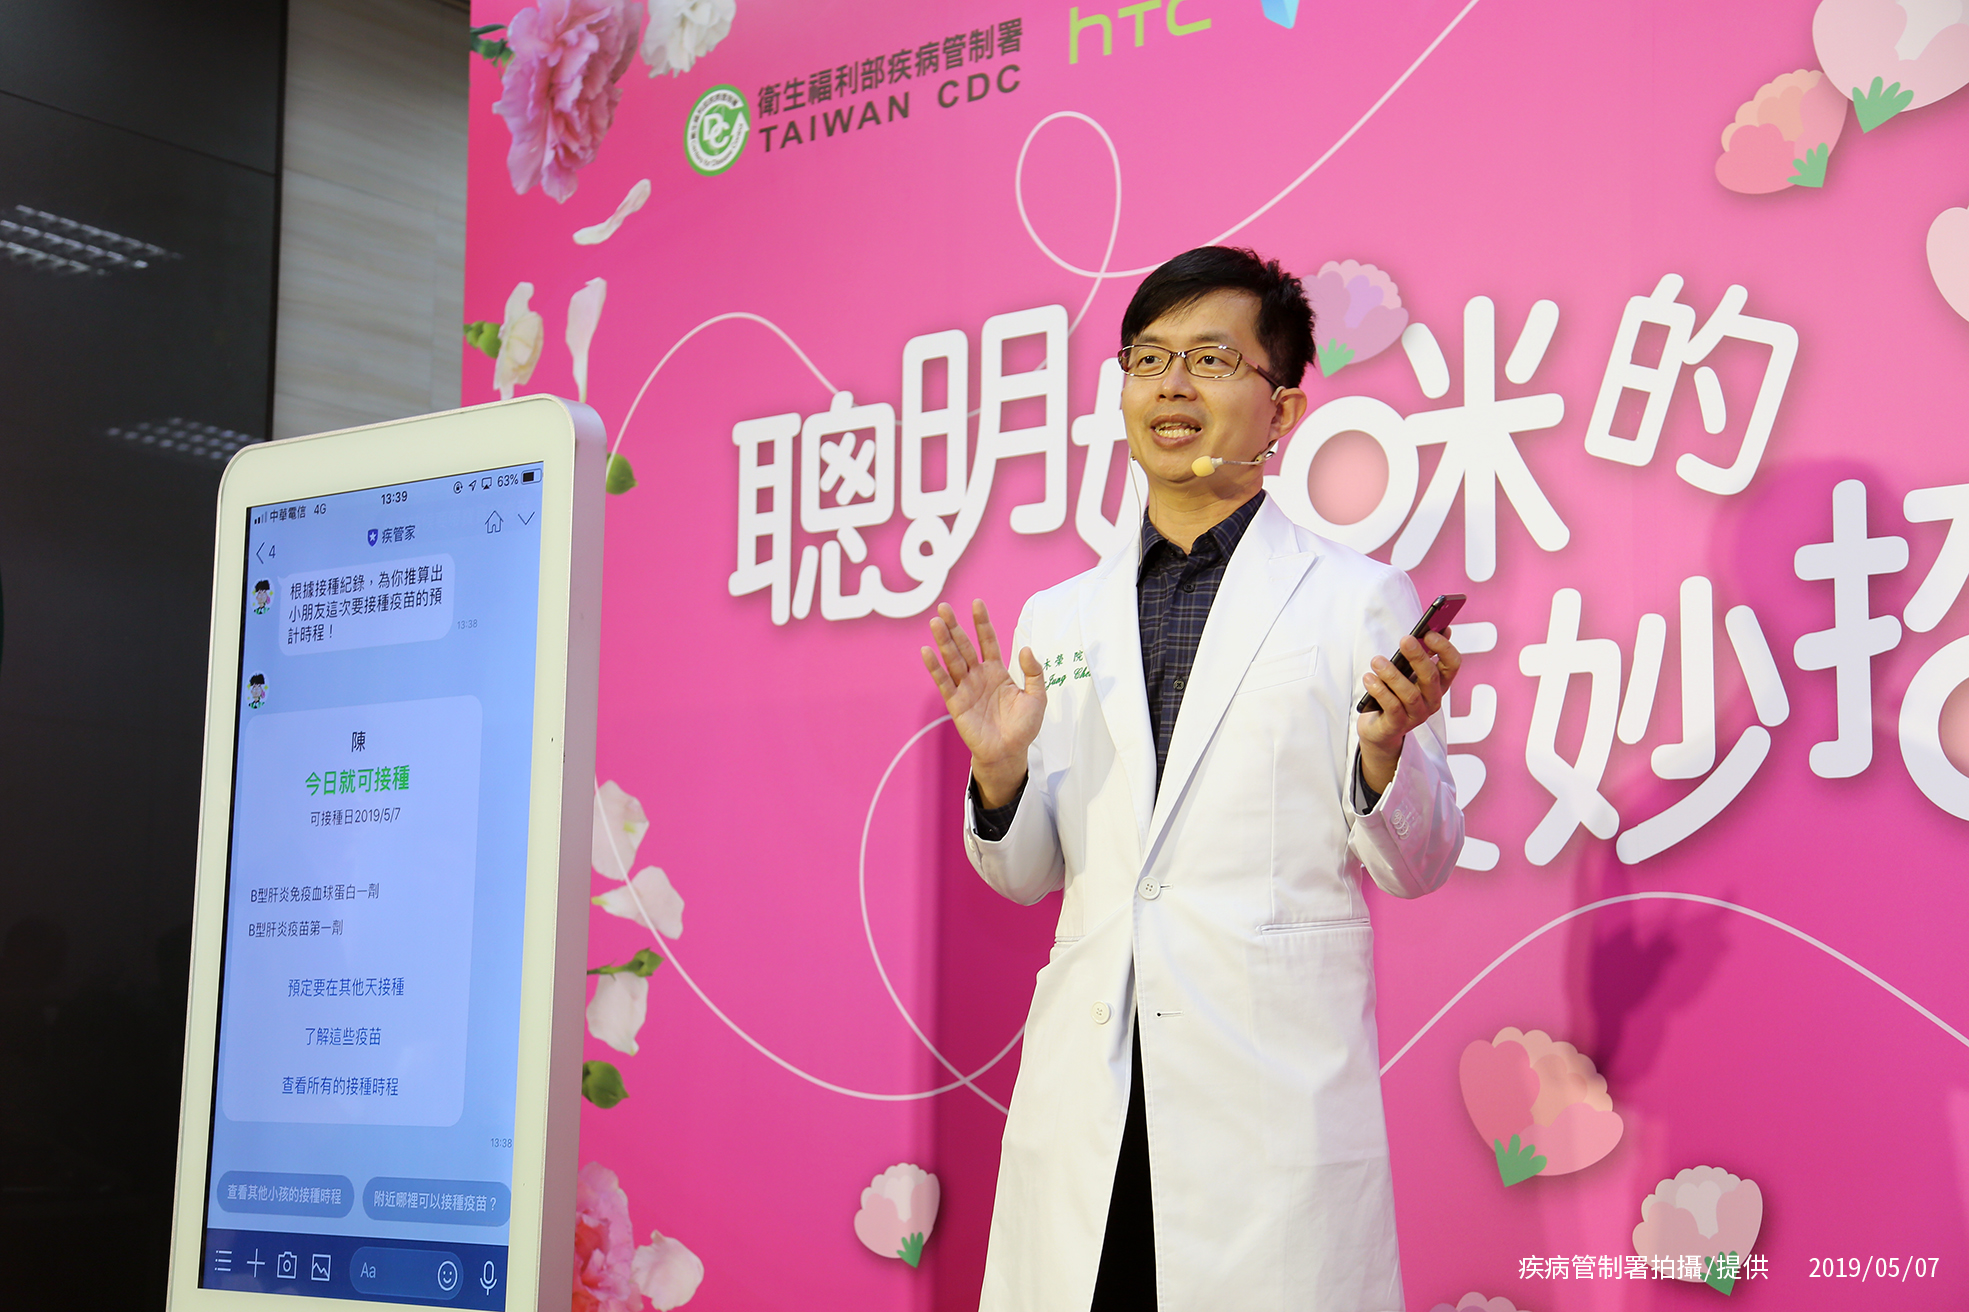 At the press conference, acclaimed pediatrician, Dr. Chen Mu-jung answered frequently asked questions about childhood immunization and demonstrated the new feature of Taiwan CDC's LINE chatbot.jpg